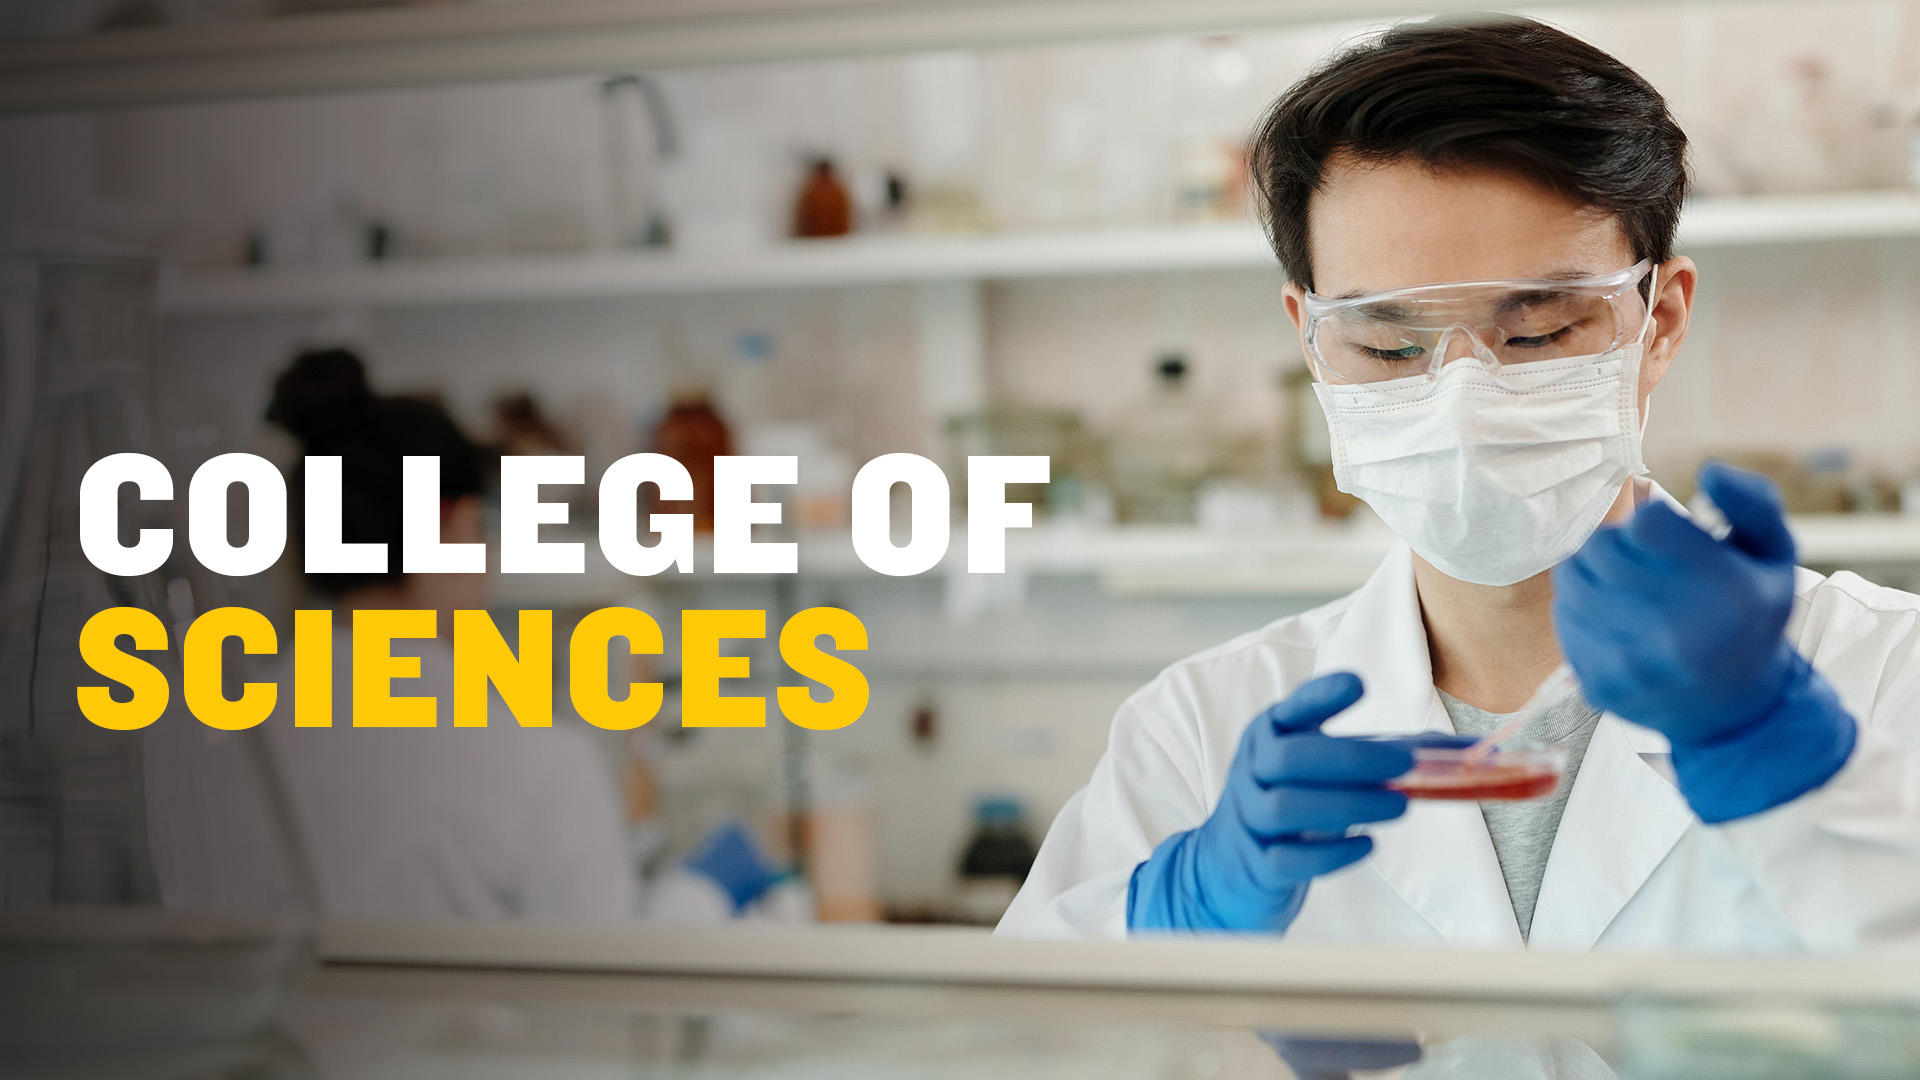 College of Sciences banner